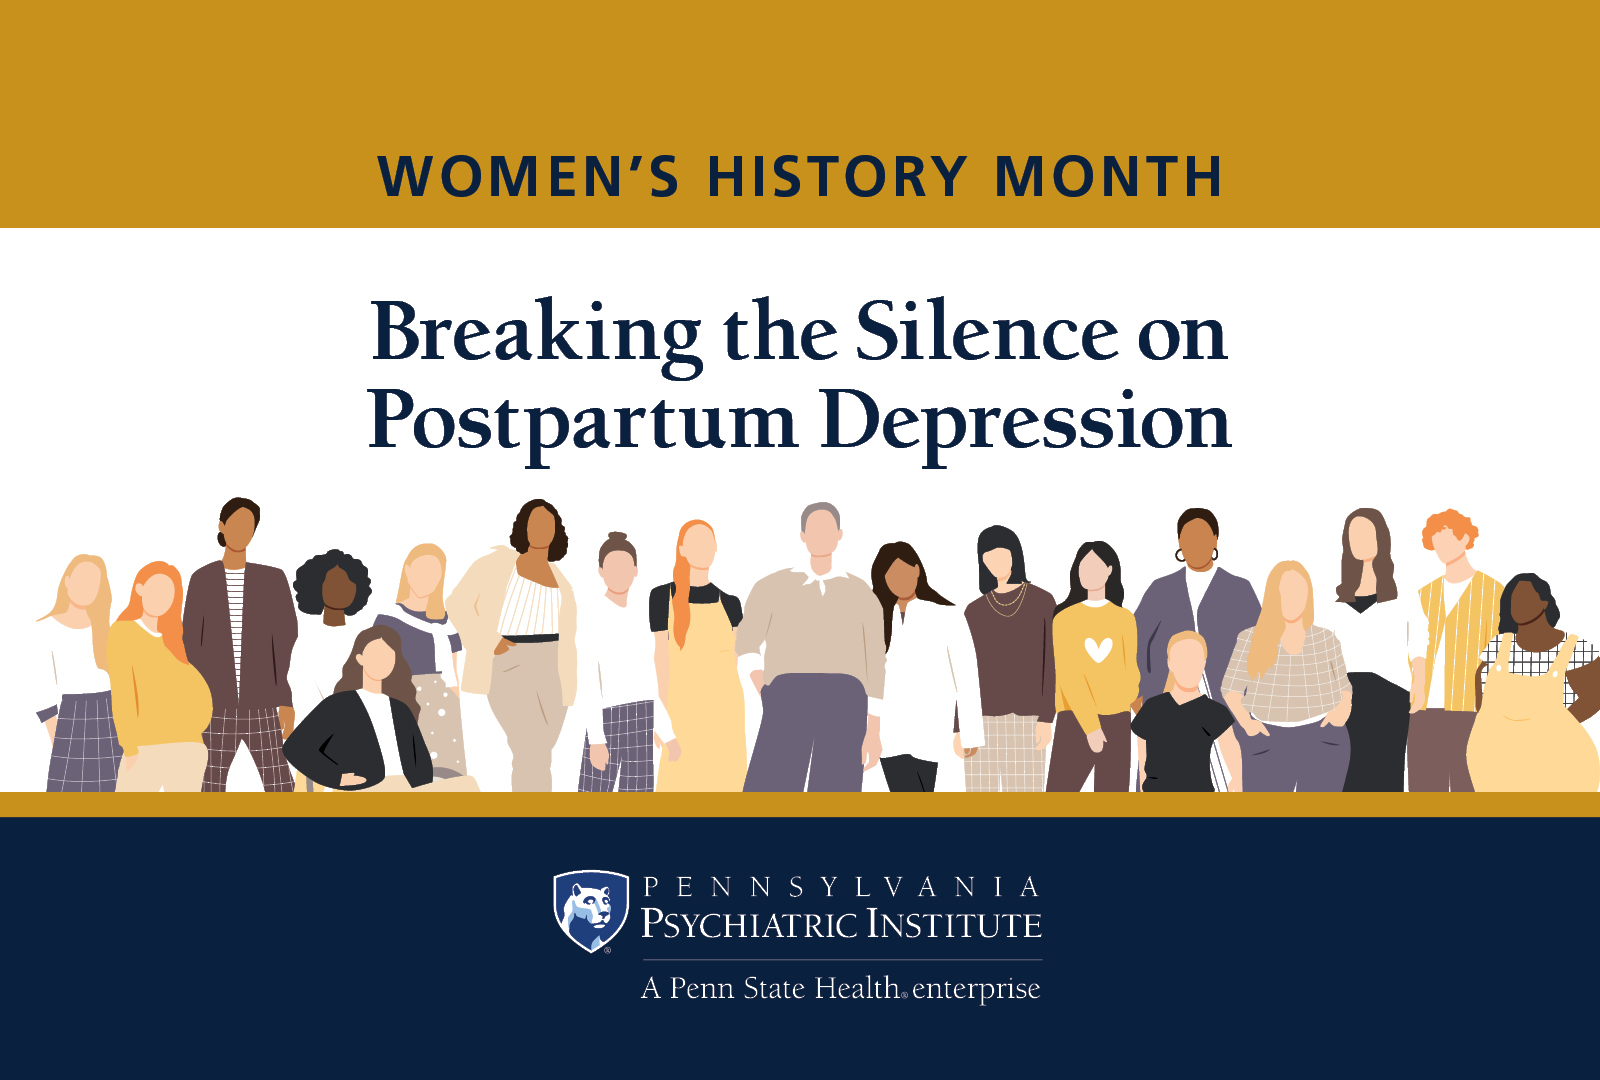 Women's History Month: Breaking the Silence on Postpartum Depression